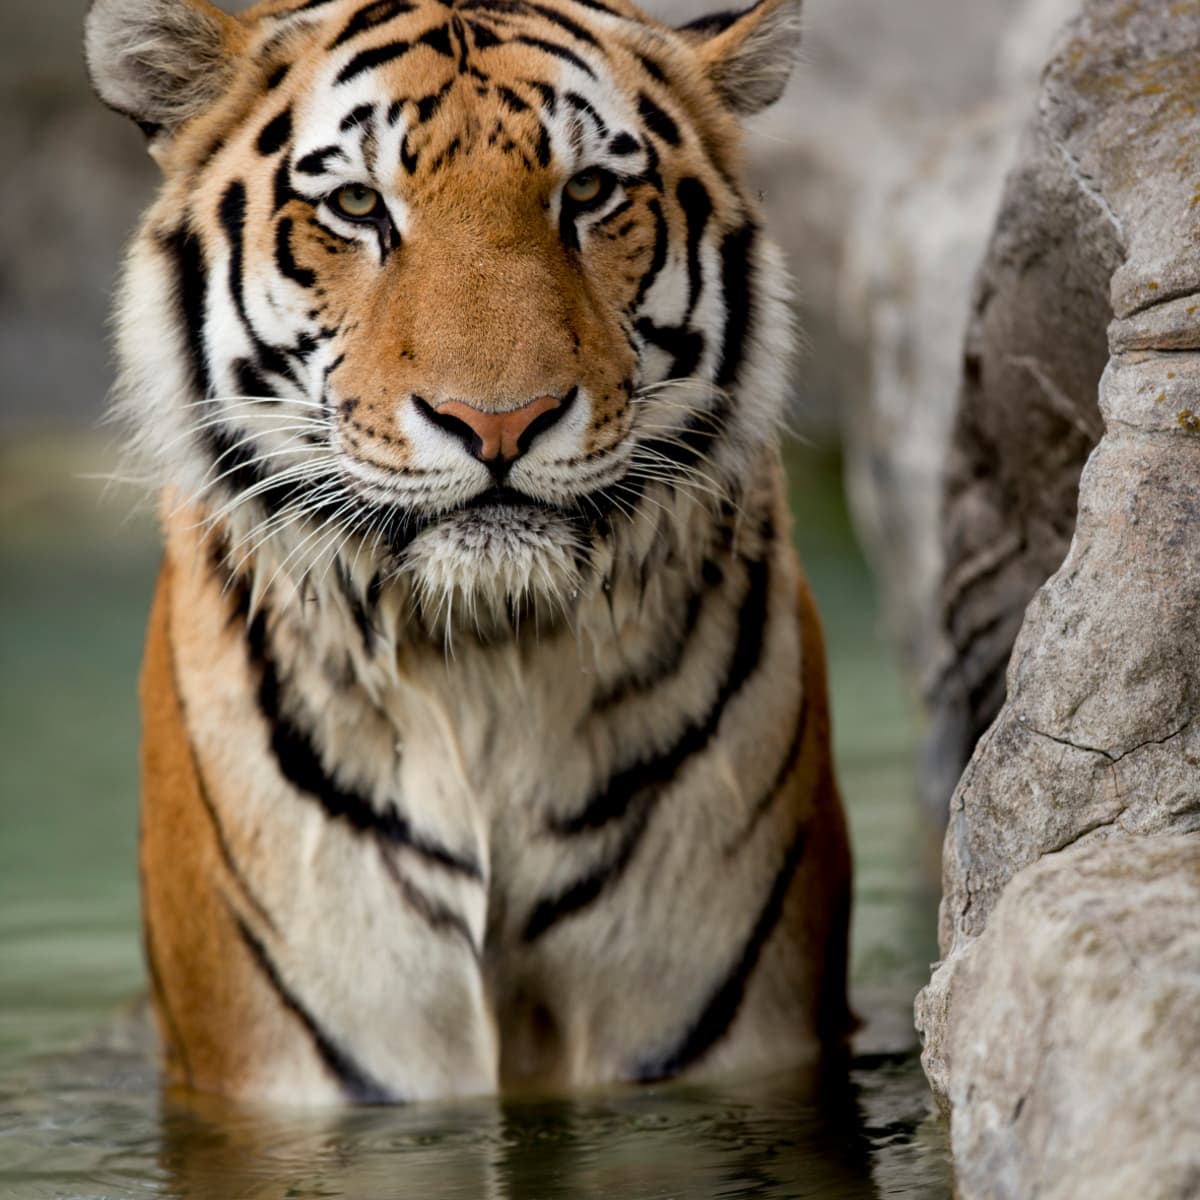 What is the name of a female tiger?